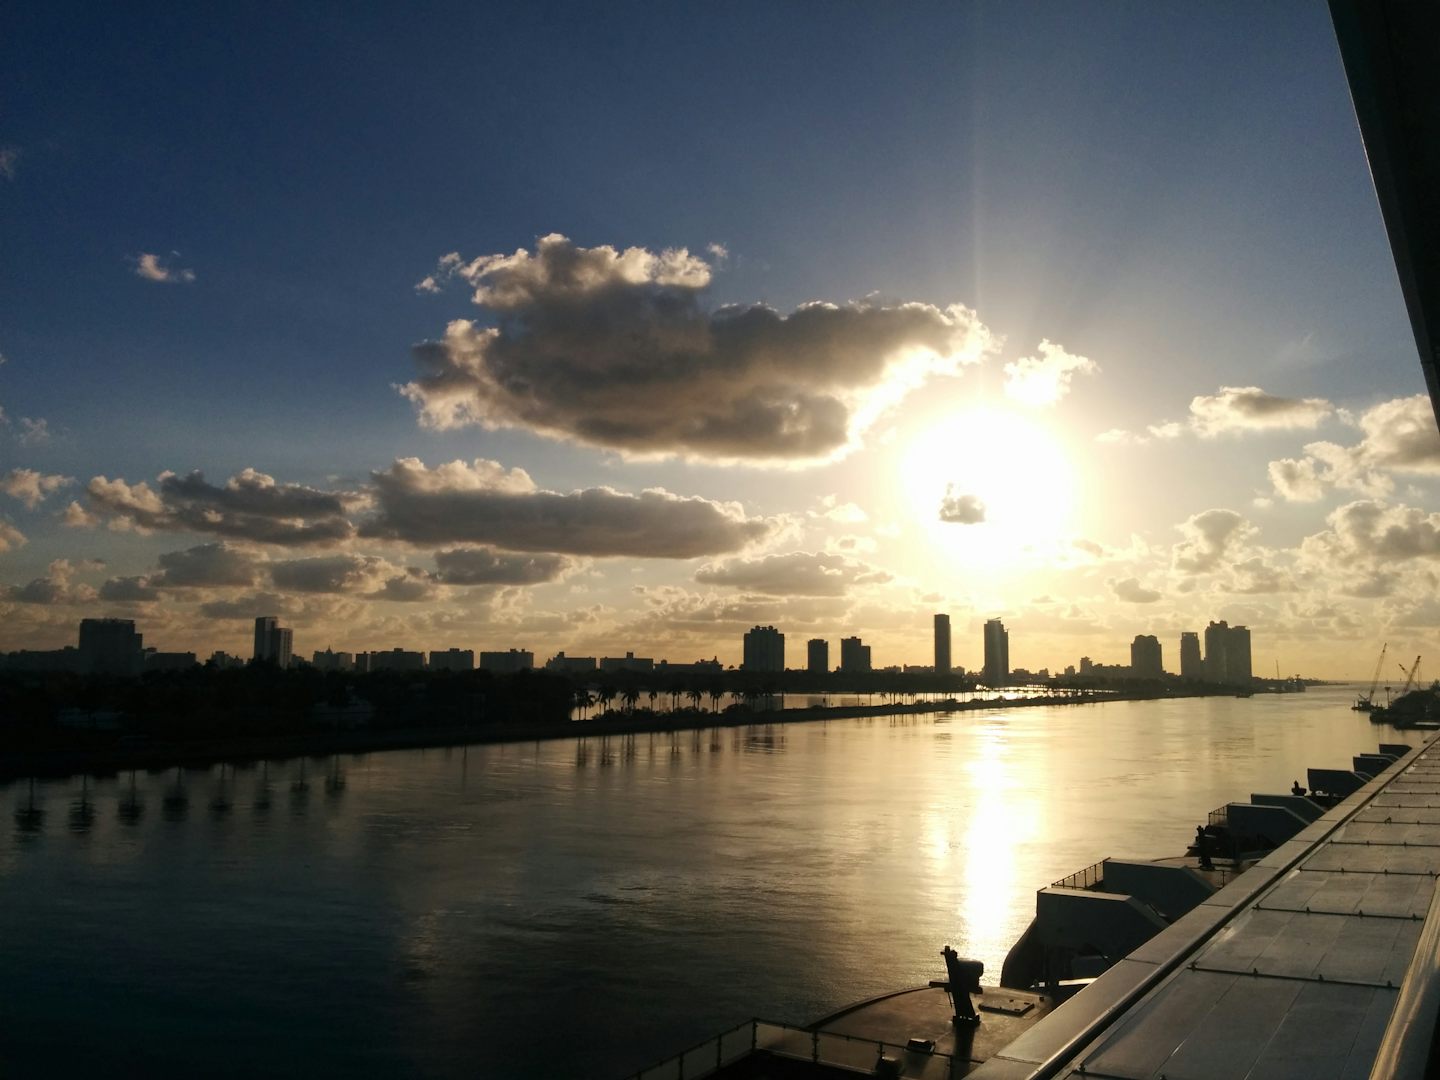 Sunrise while arriving to port of Miami on last day of cruise. Beautiful!!